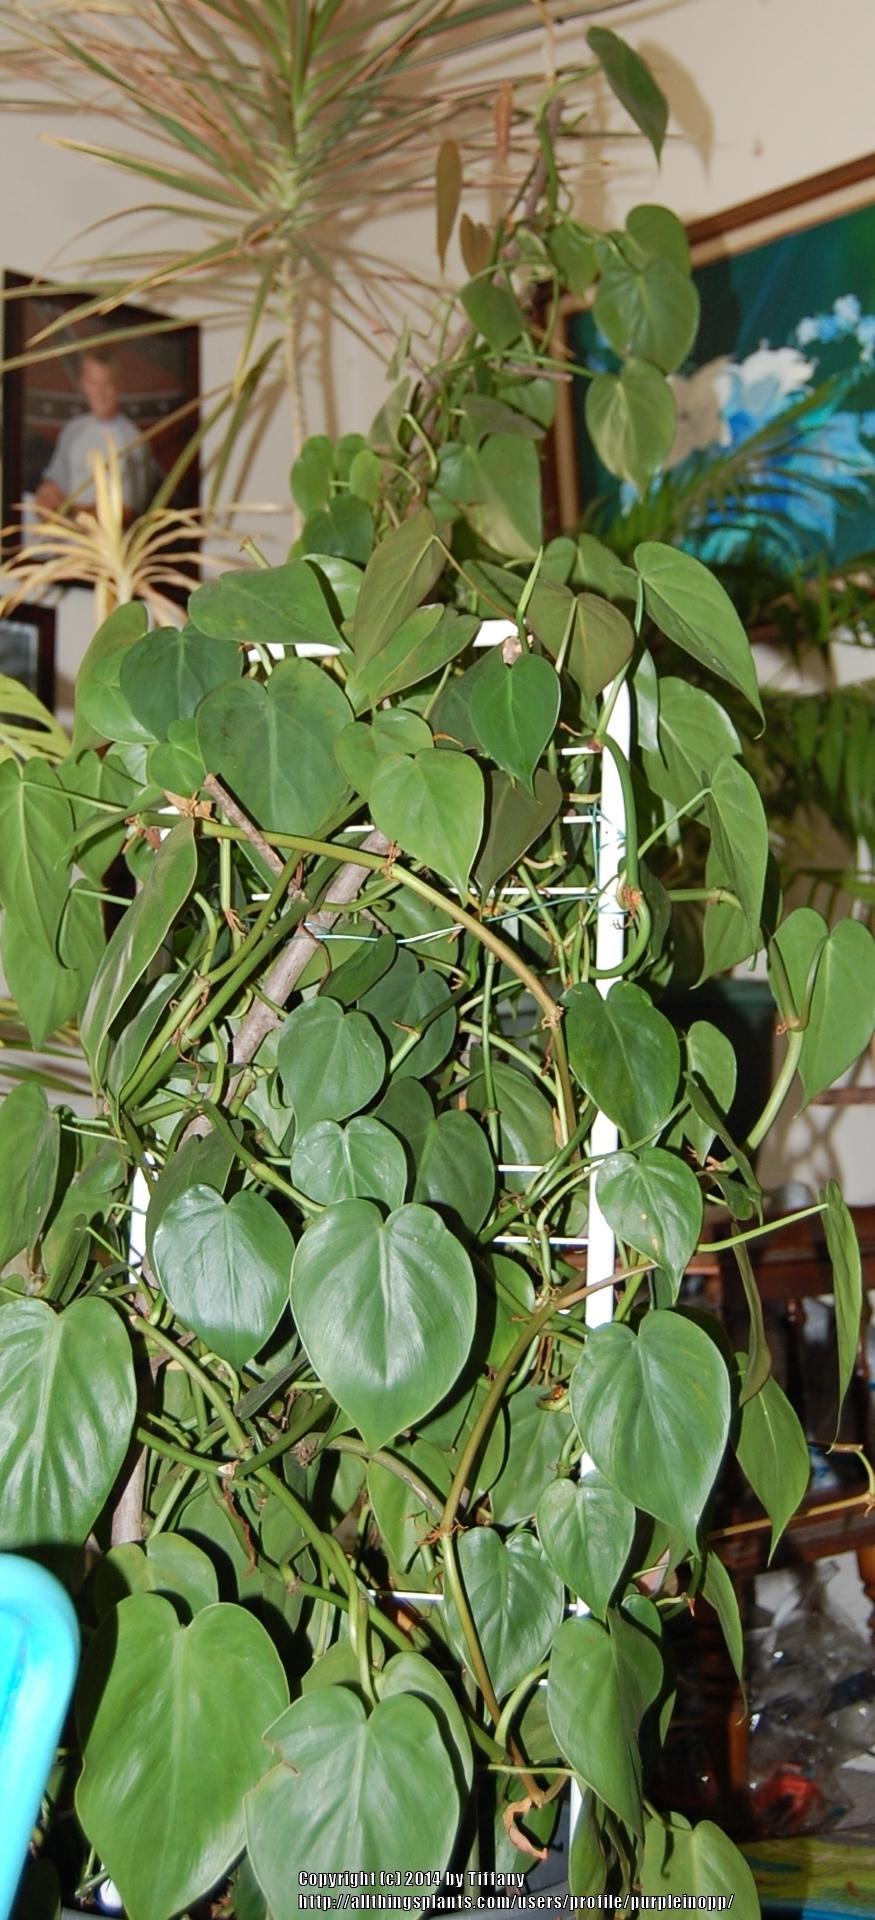 Photo of Heart Leaf Philodendron (Philodendron hederaceum var. oxycardium) uploaded by purpleinopp